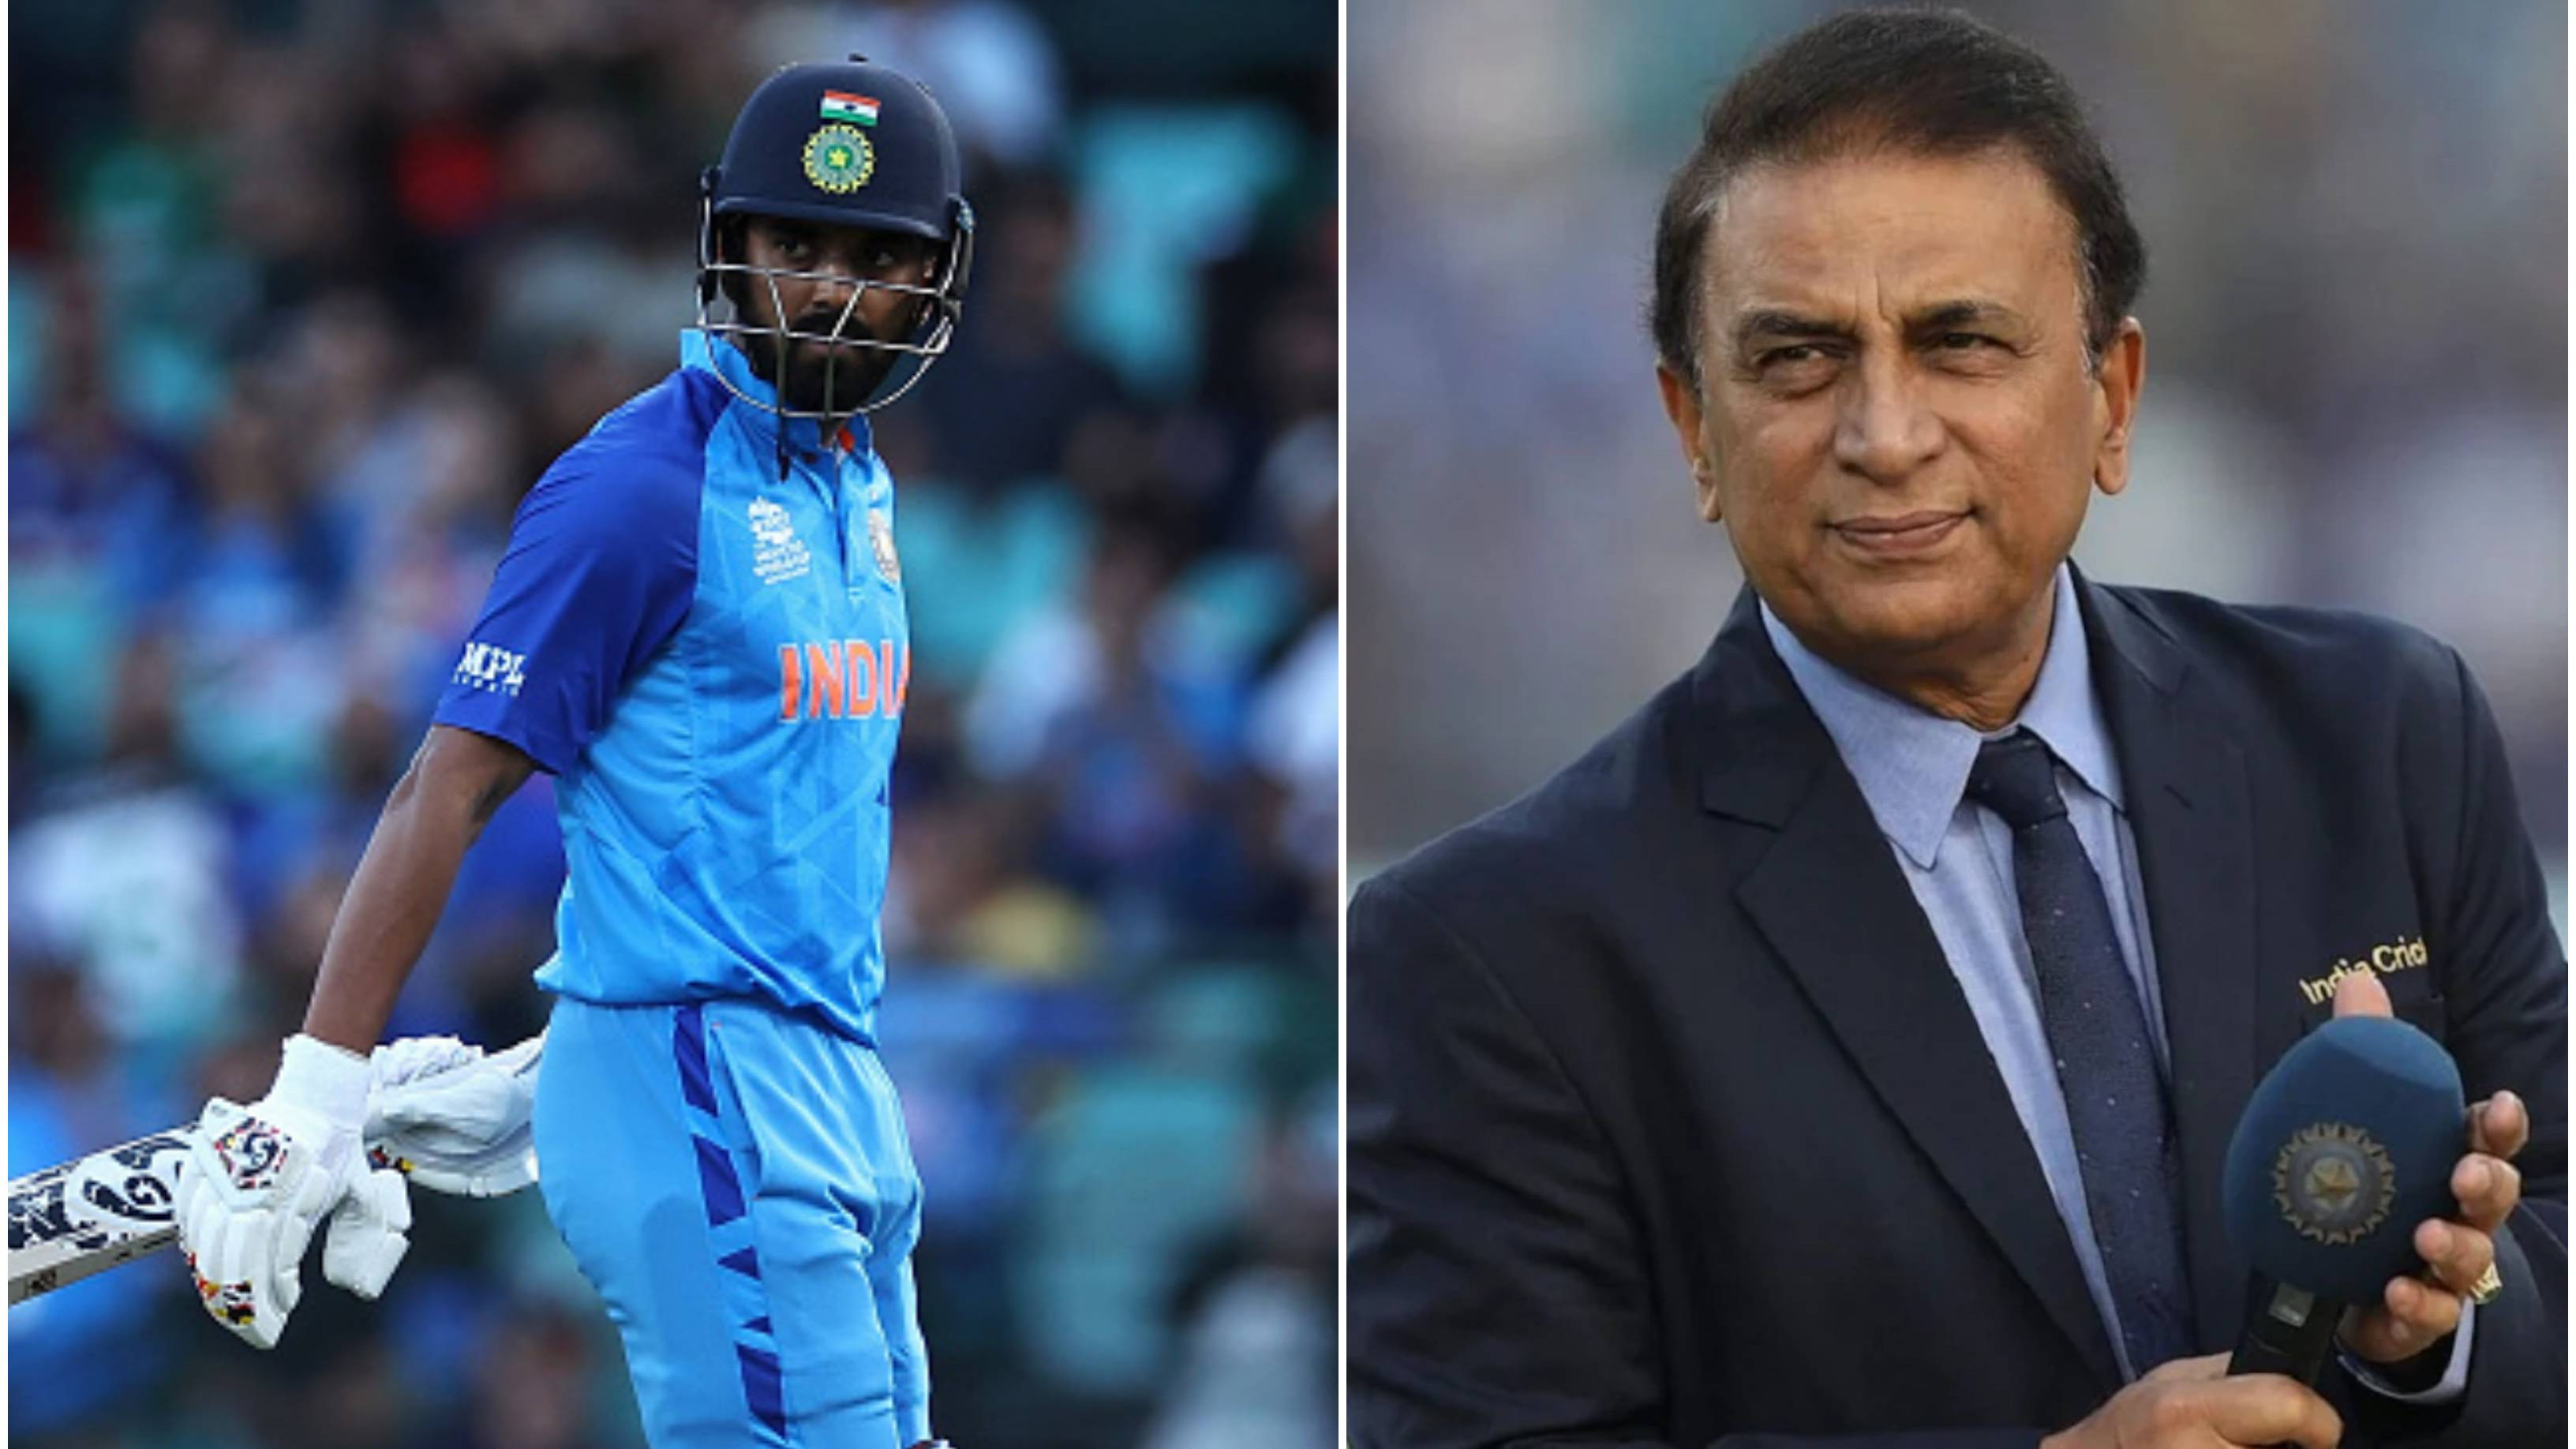 T20 World Cup 2022: “He doesn’t seem to believe in himself,” Gavaskar on KL Rahul amid his poor run with the bat